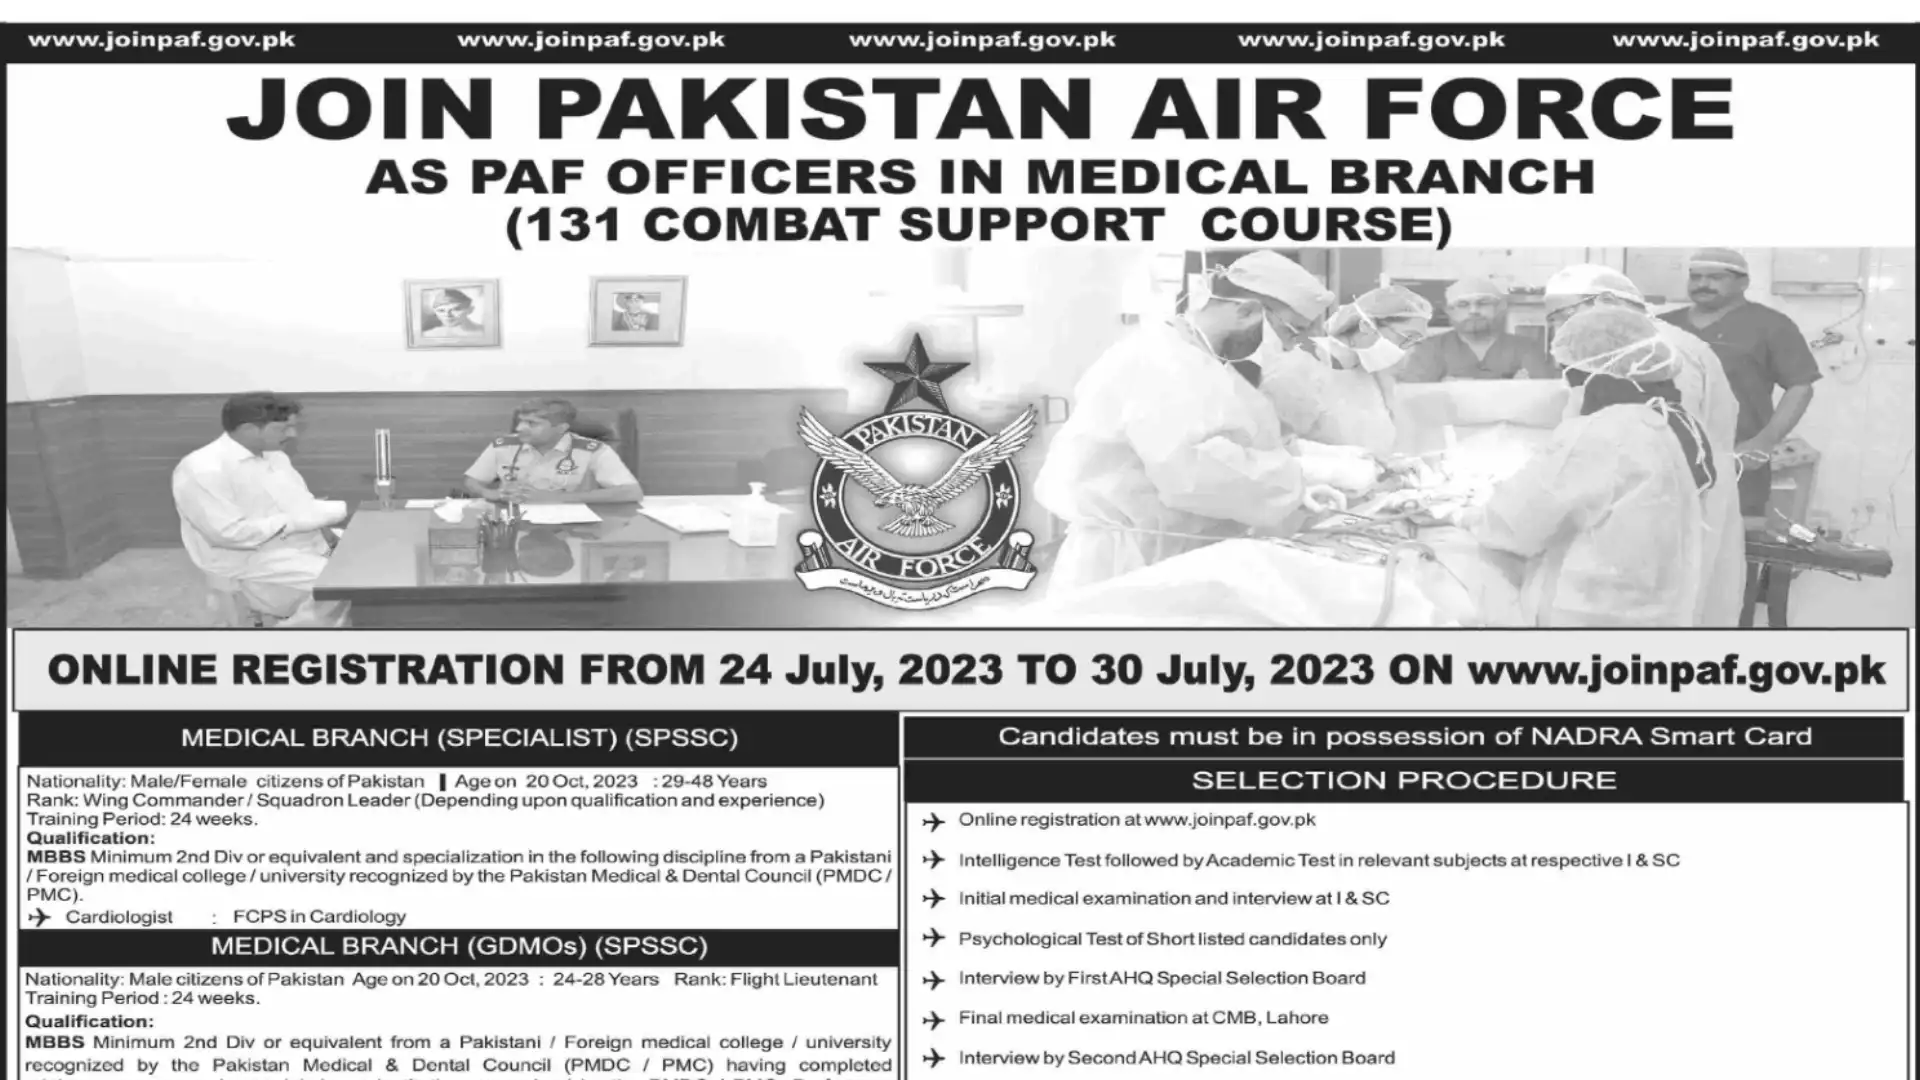 Benefits of joining PAF